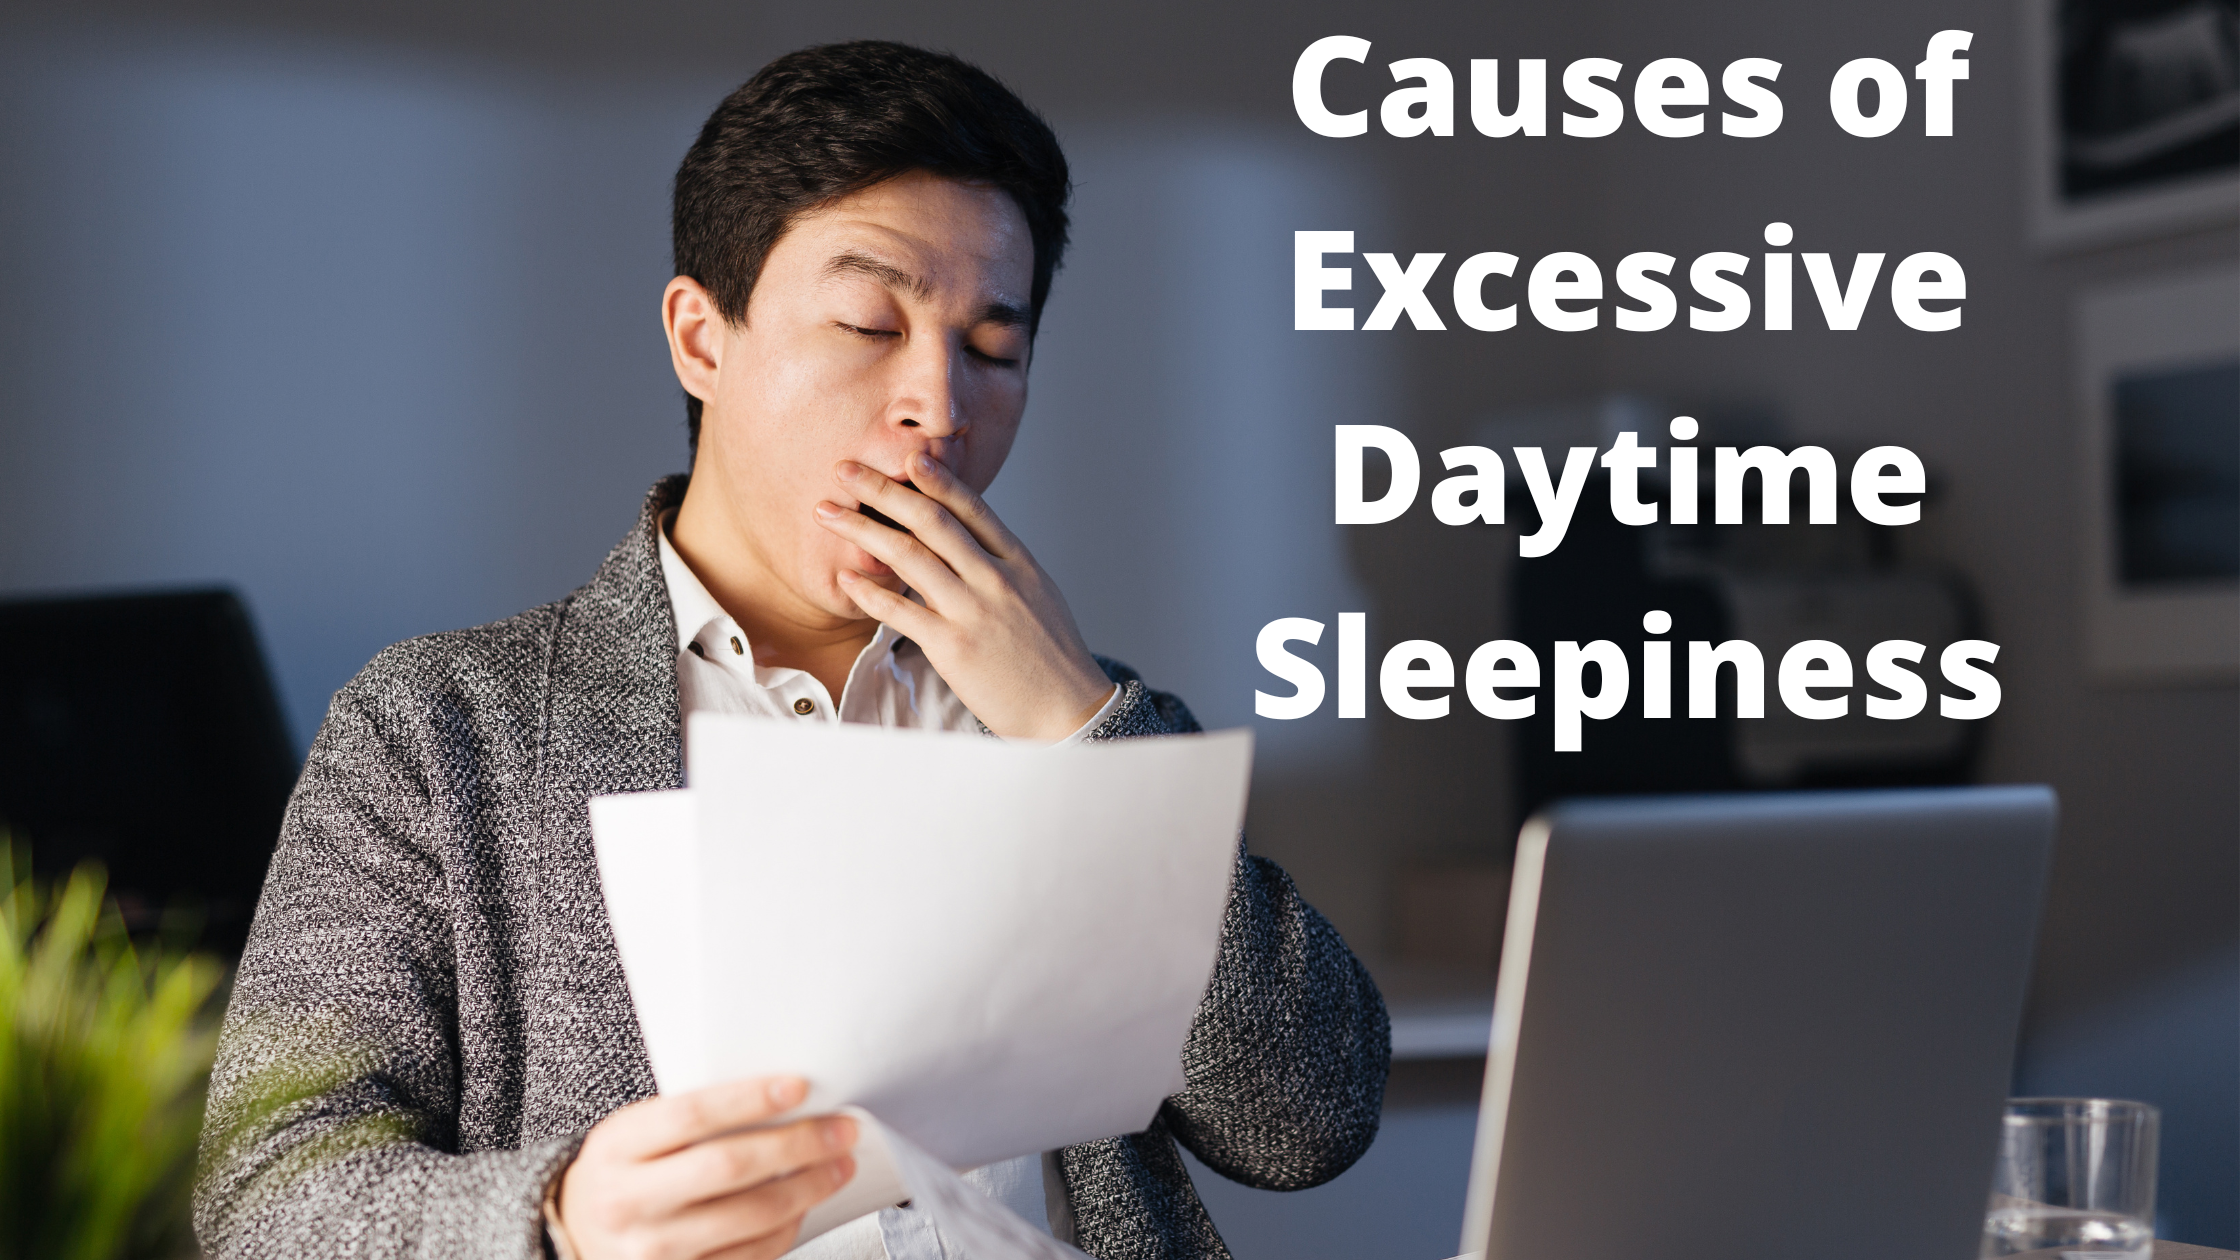 Causes of Excessive Daytime Sleepiness